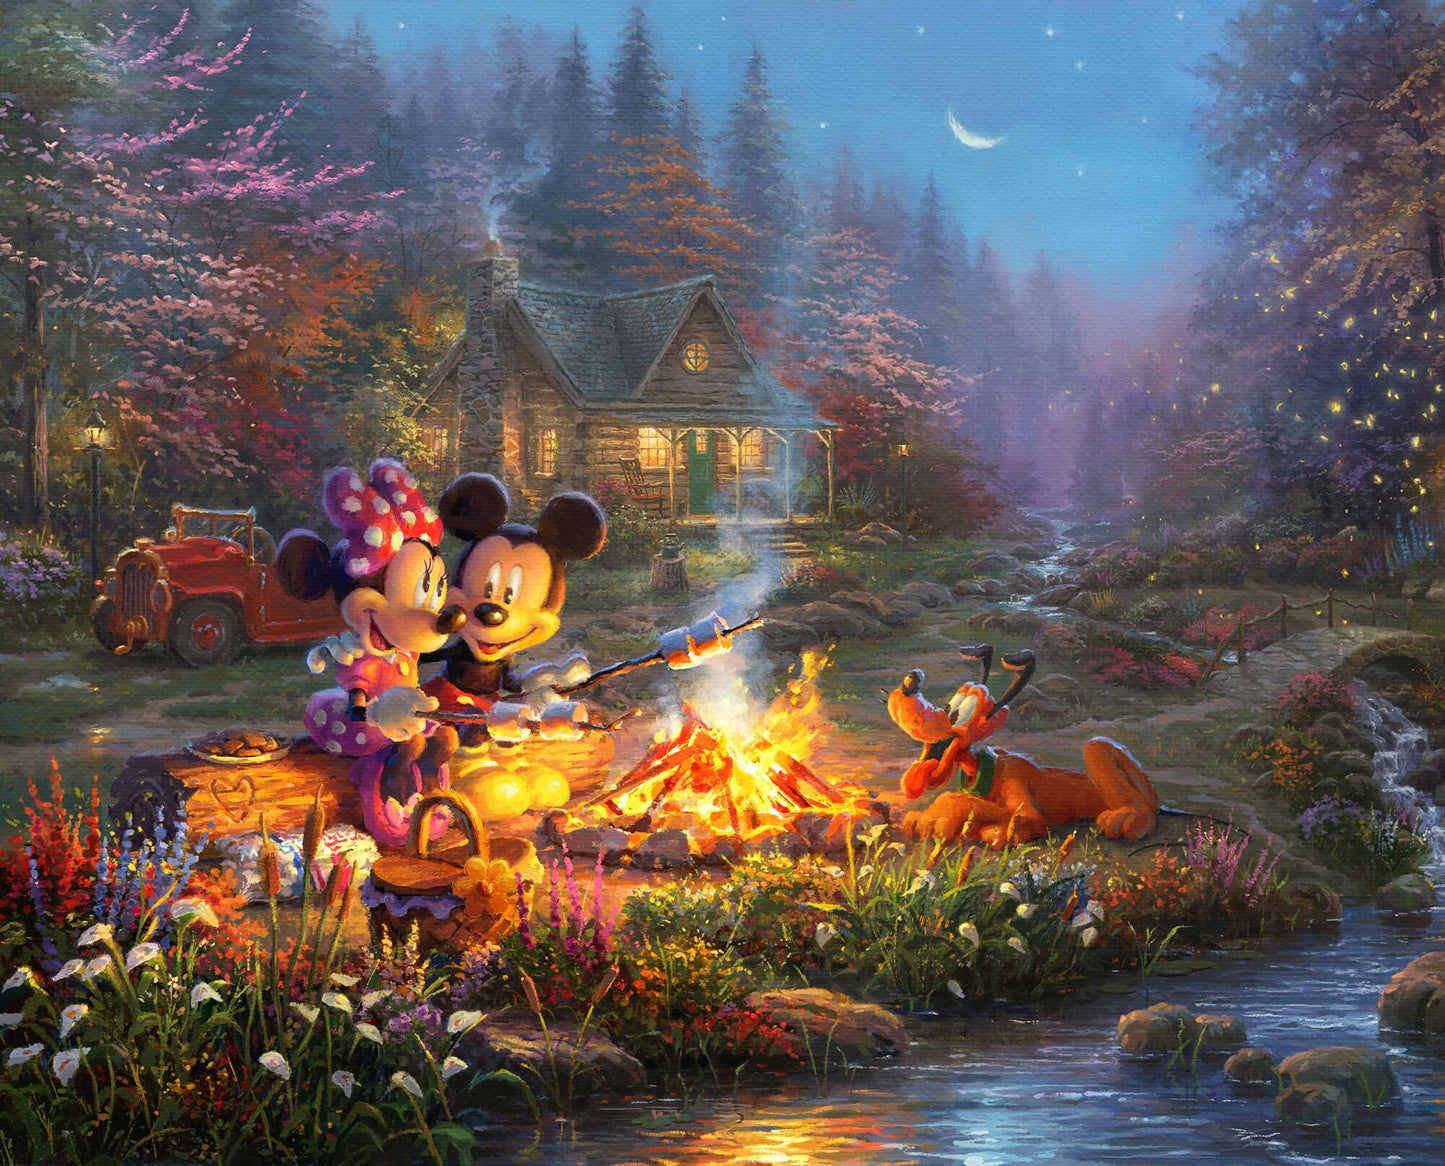 Disney Dreams Collection by Thomas Kinkade Studios 36" Panel Sweetheart Campfire DS-2052-9C Cotton Woven Fabric